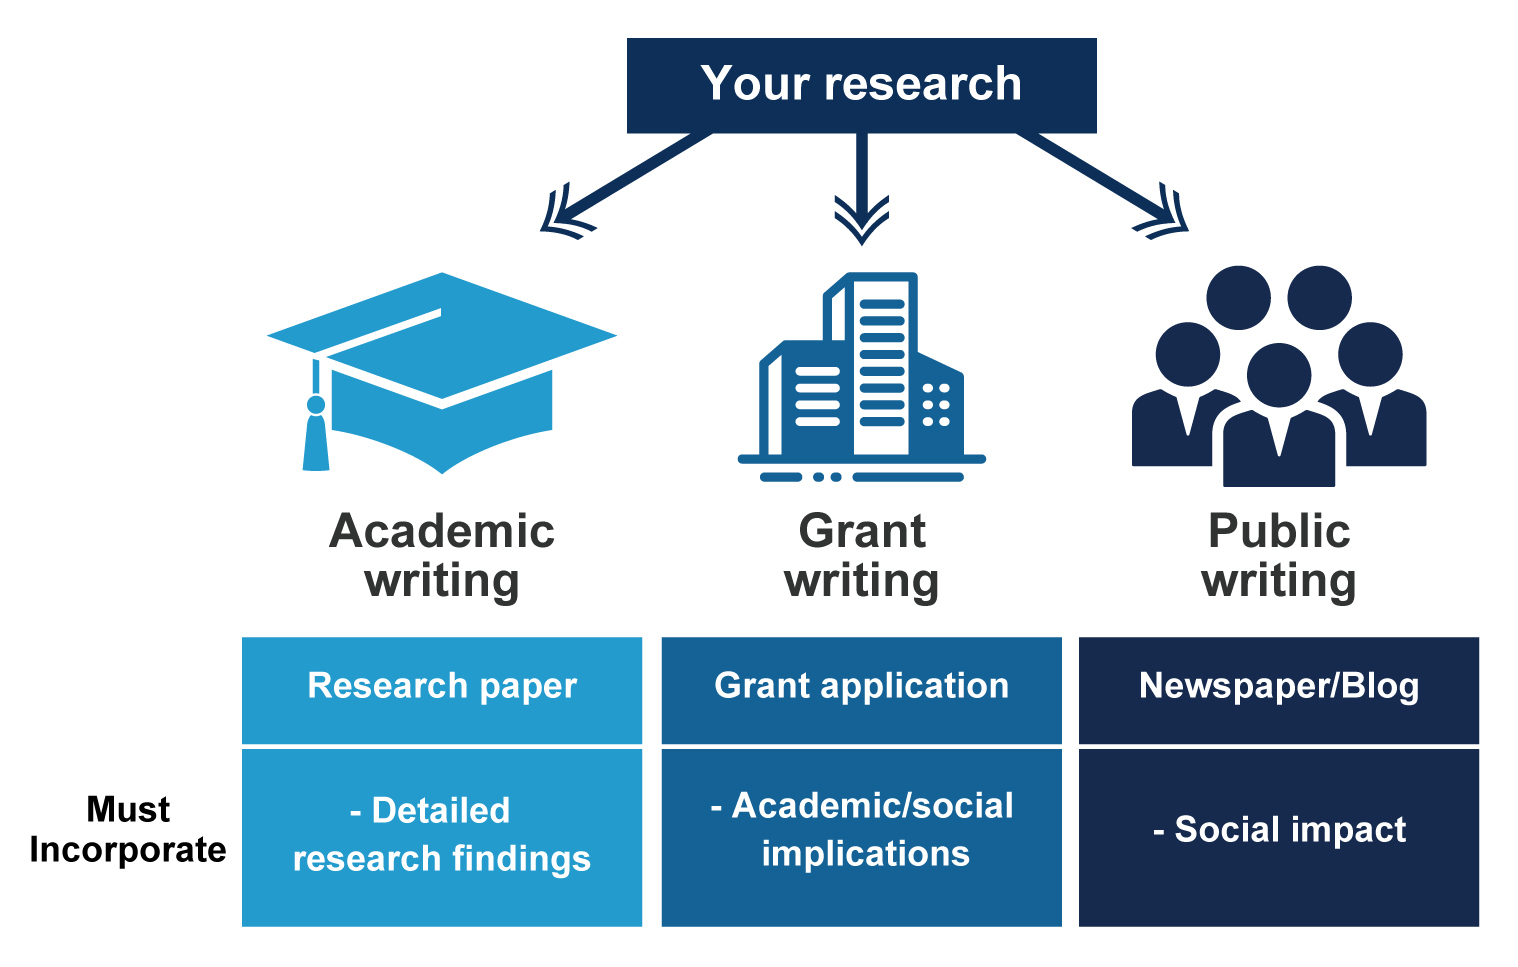 TELLING YOUR RESEARCH STORY